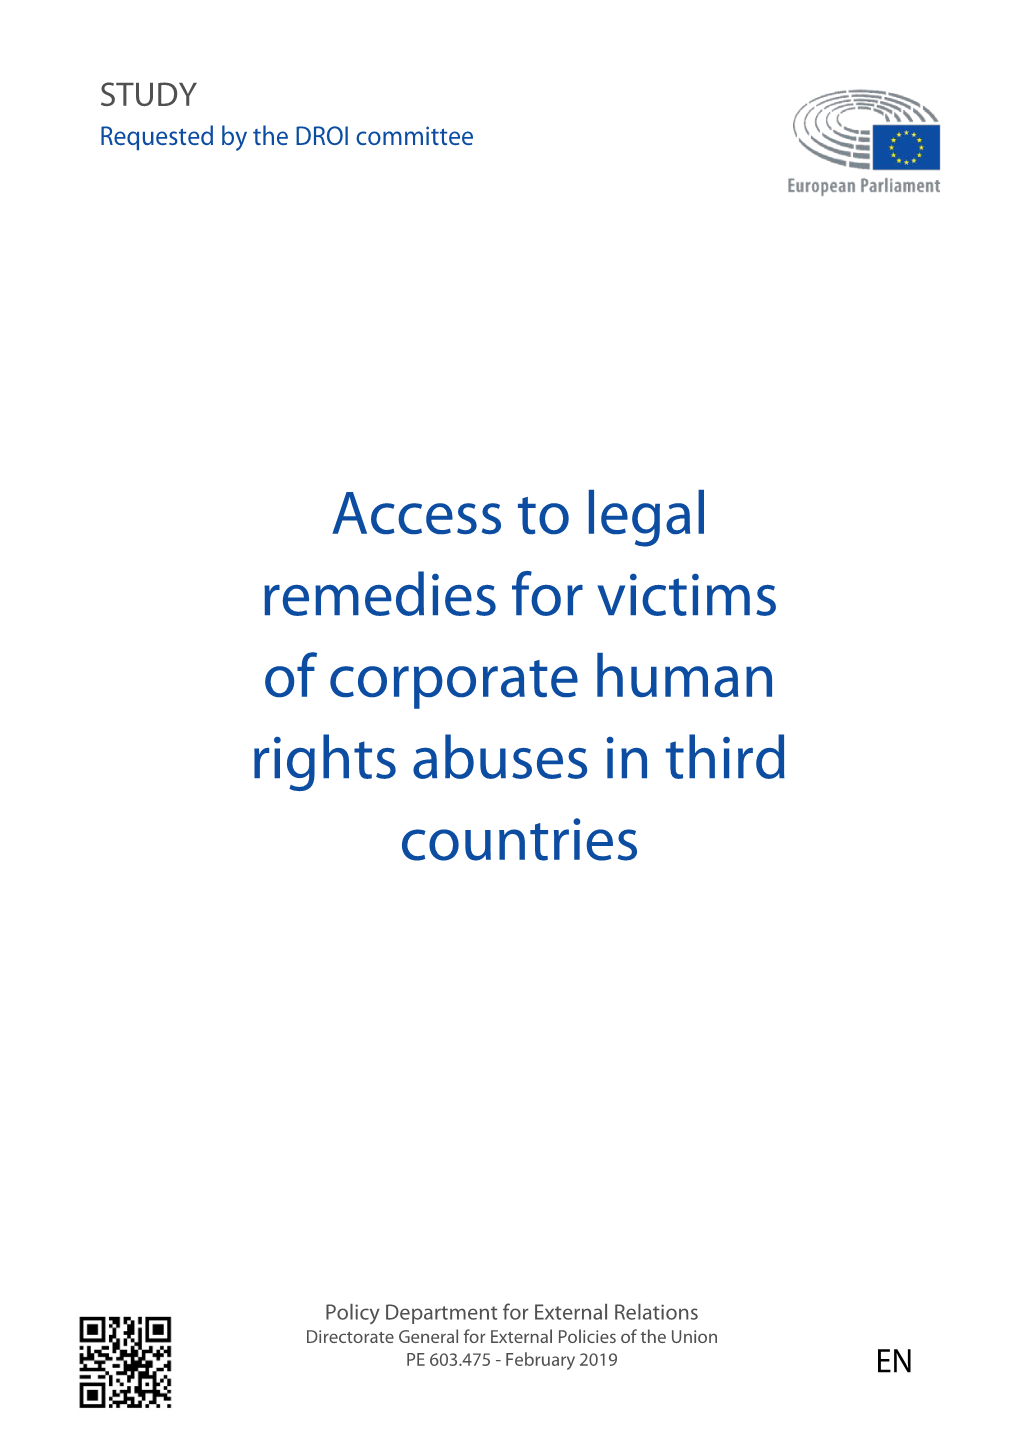 Access to Legal Remedies for Victims of Corporate Human Rights Abuses in Third Countries